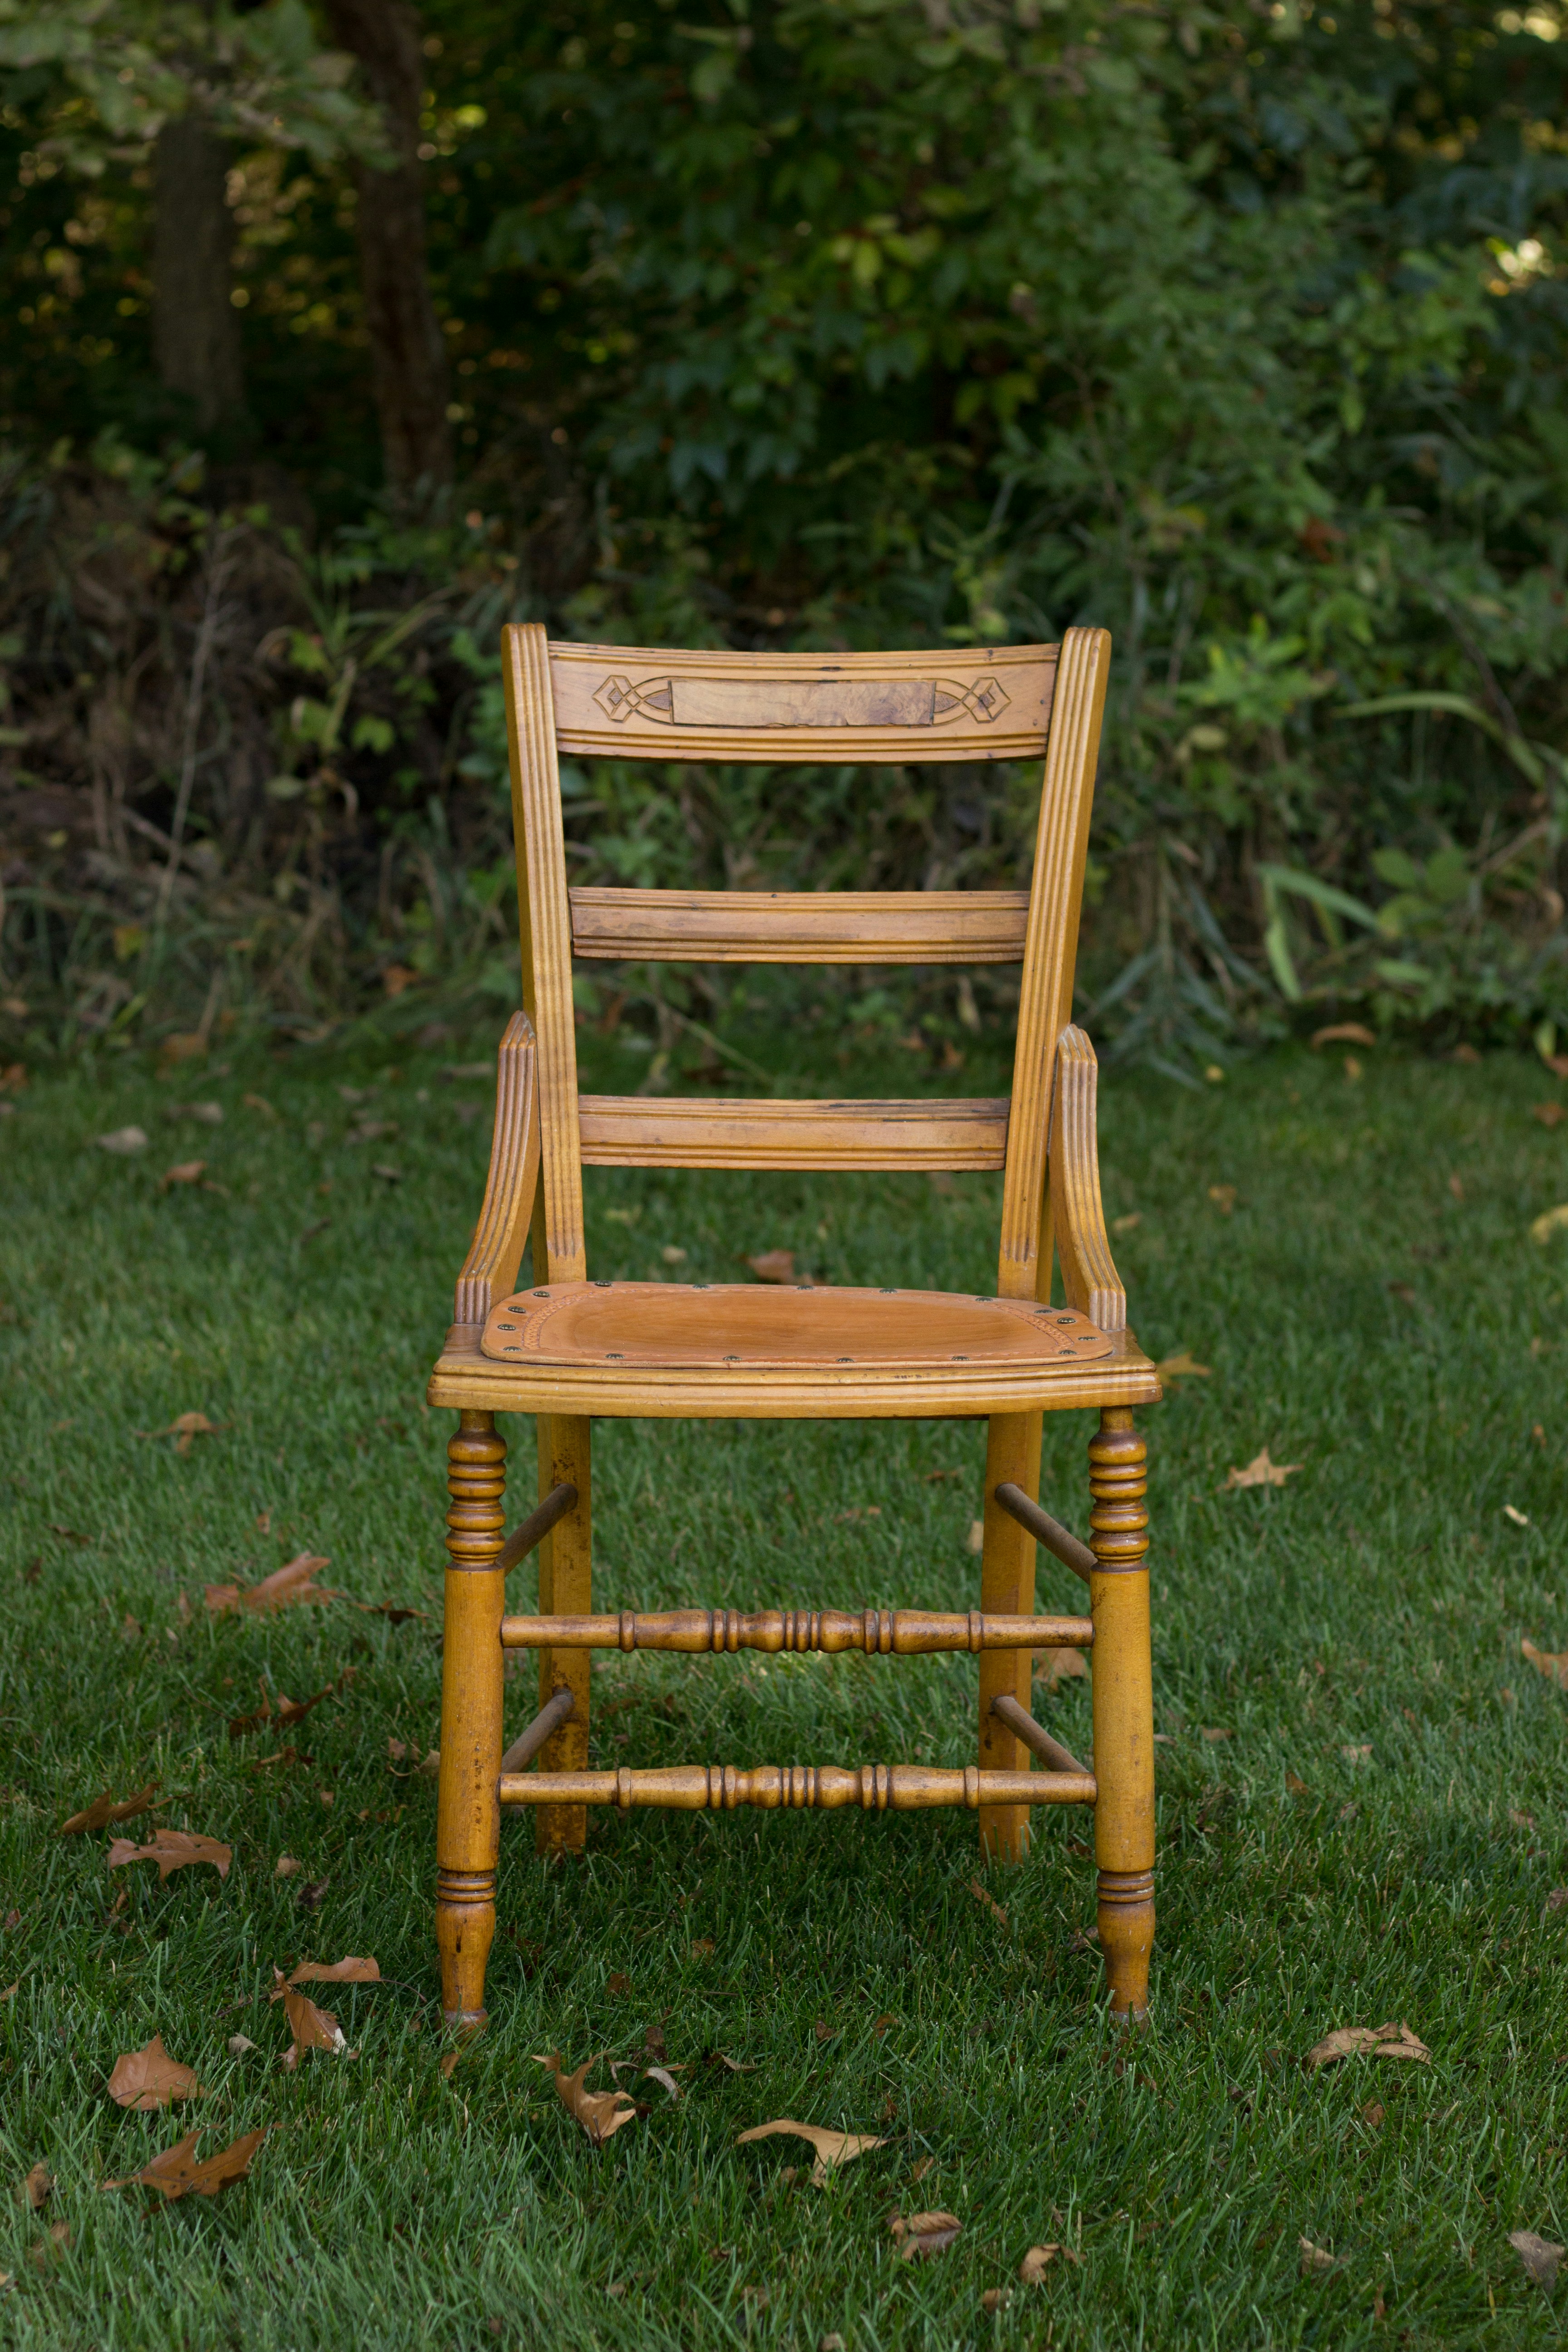 &quot;I was getting some staging ready to take some newborn photos of my niece. This chair belonged to some of our ancestors. And it just looked so empty waiting there to be filled with the next generation. She is carrying on the name of two great-grandmothers just as we carry on using the chairs they used. The autumn season is just beginning, and those leaves tell a story of passing time, a change in a story.&quot;